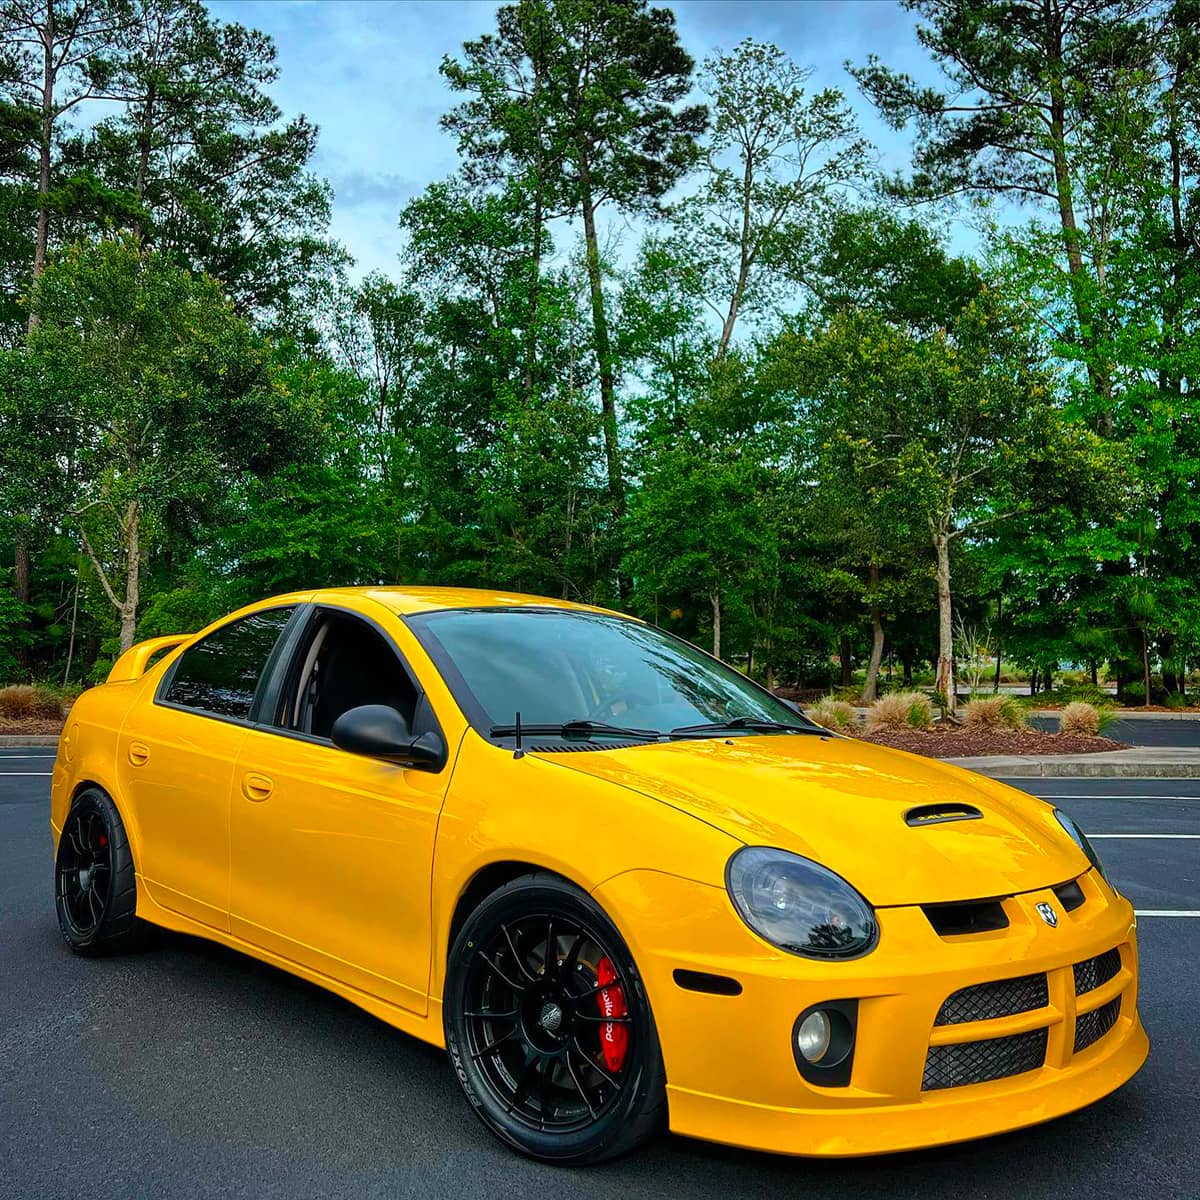 Dodge Neon SRT4 with Wilwood performance brakes and red calipers